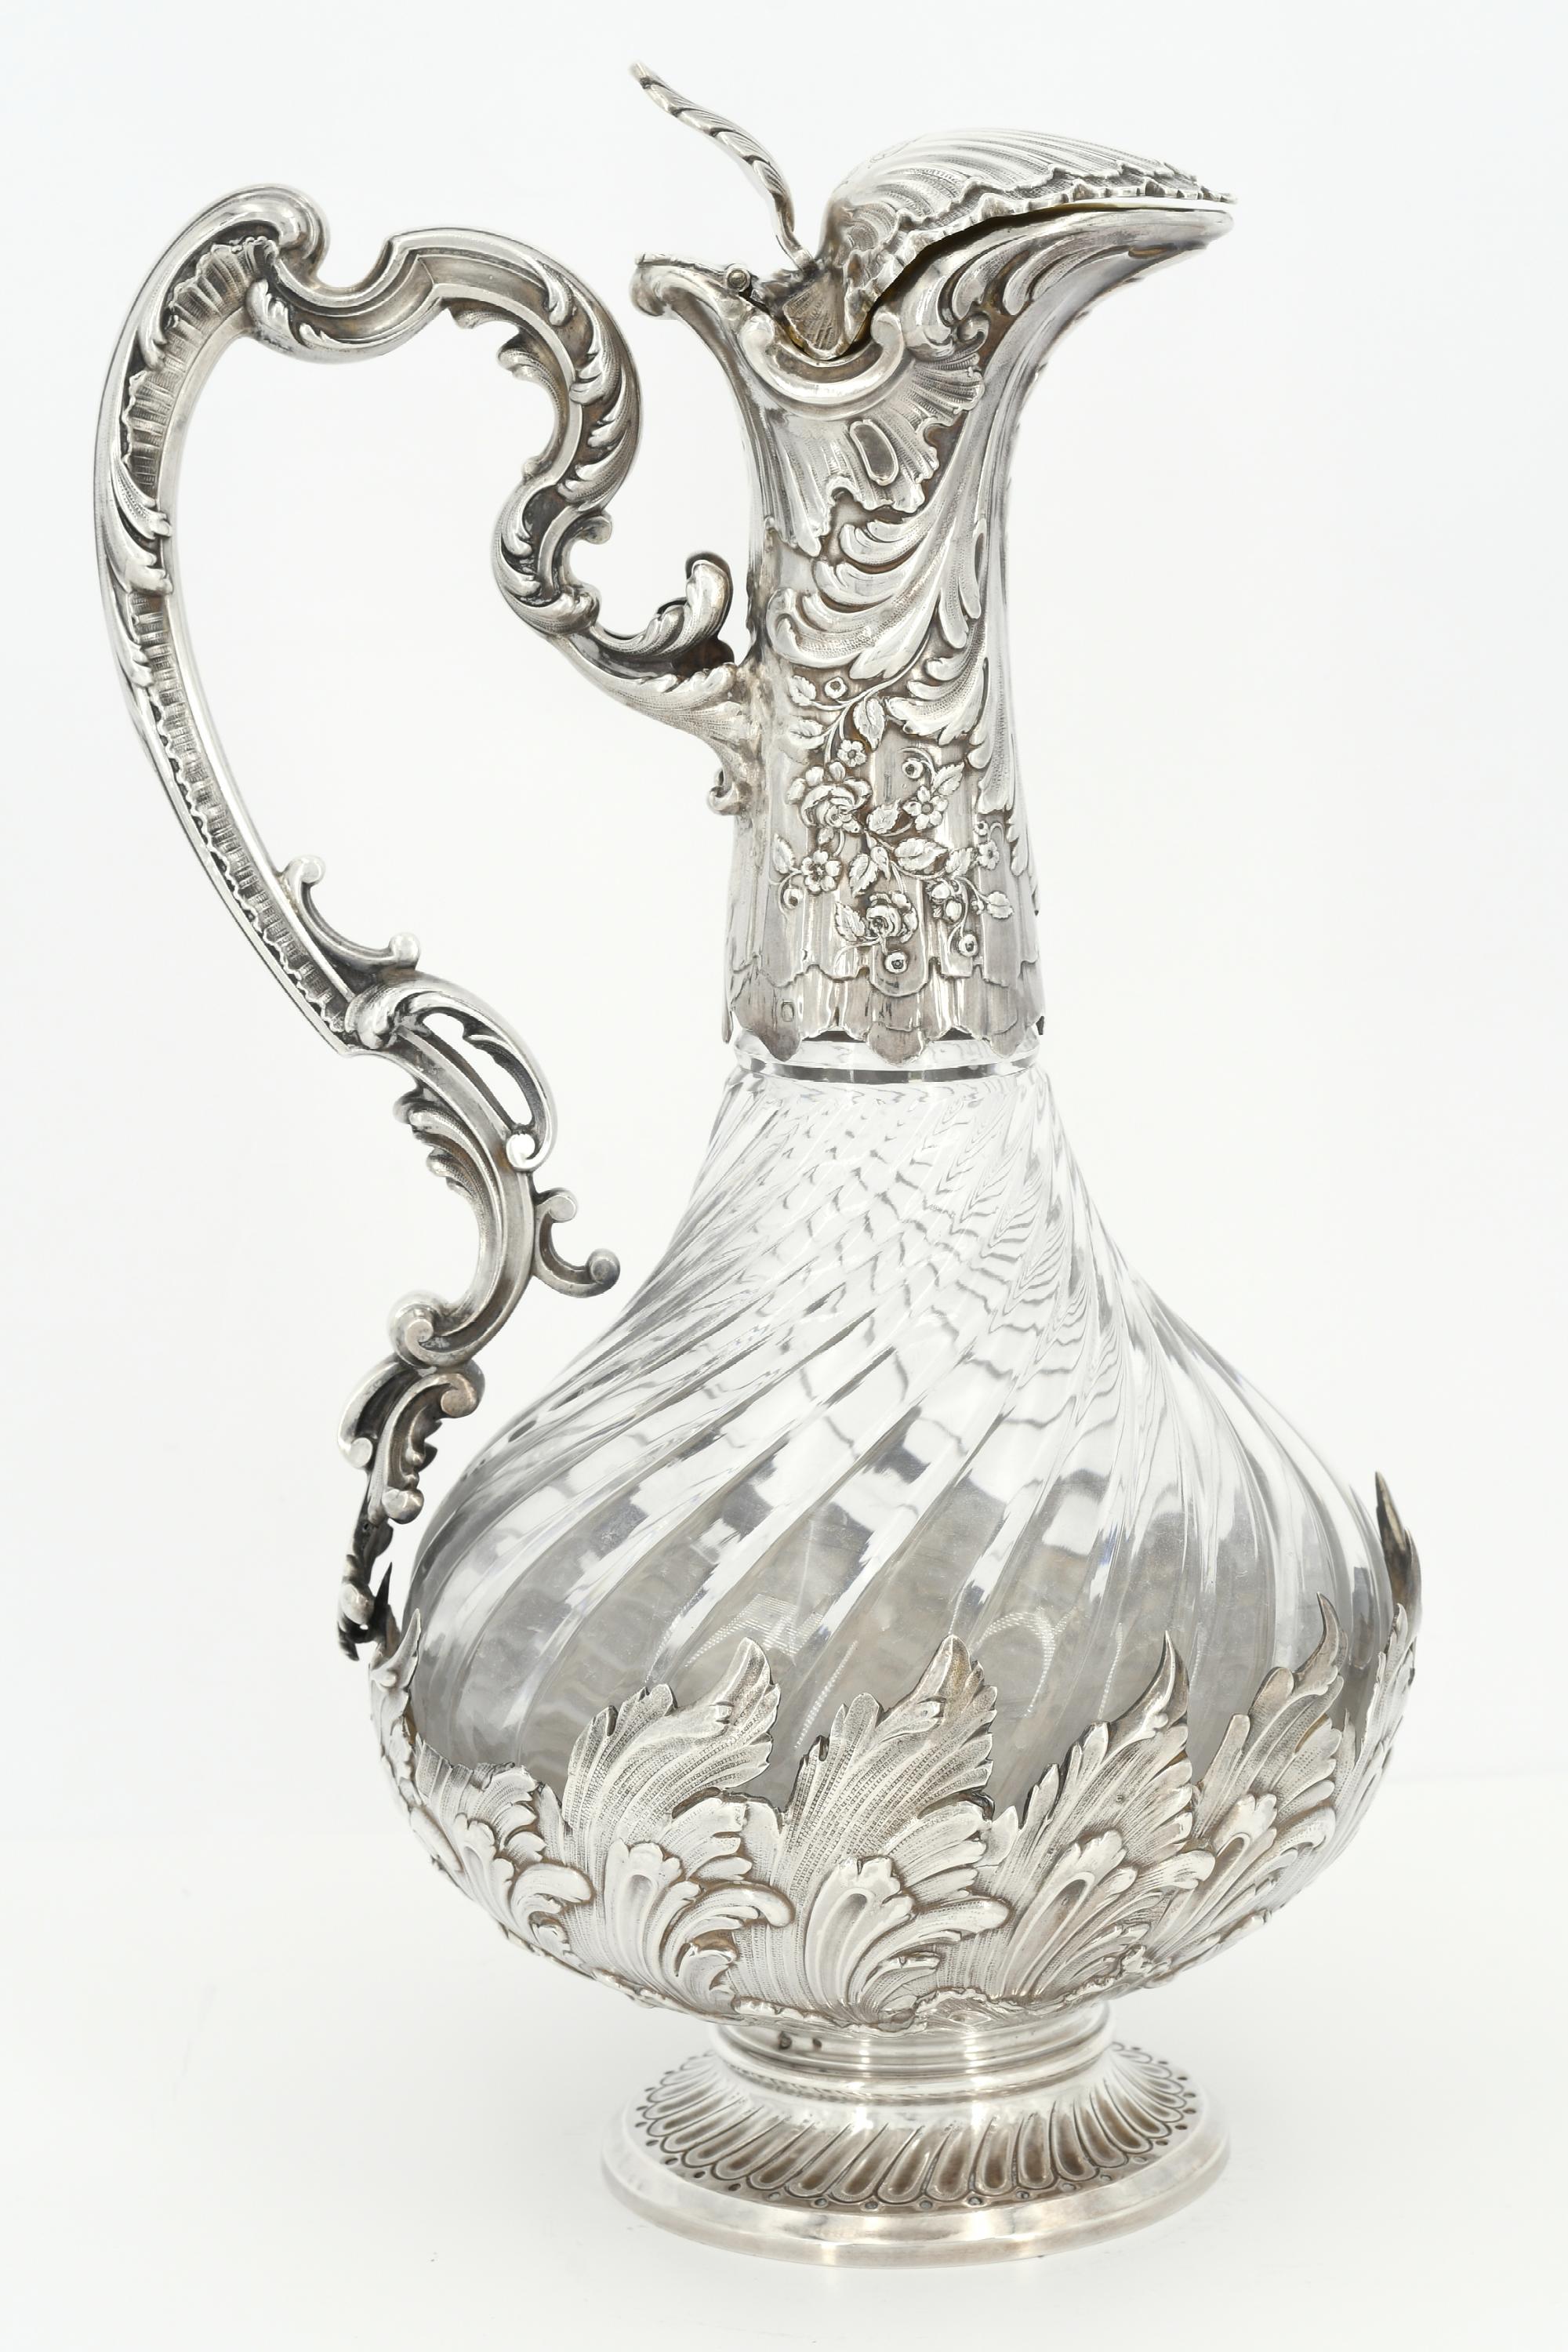 Rococo style silver and glass carafe - Image 2 of 8